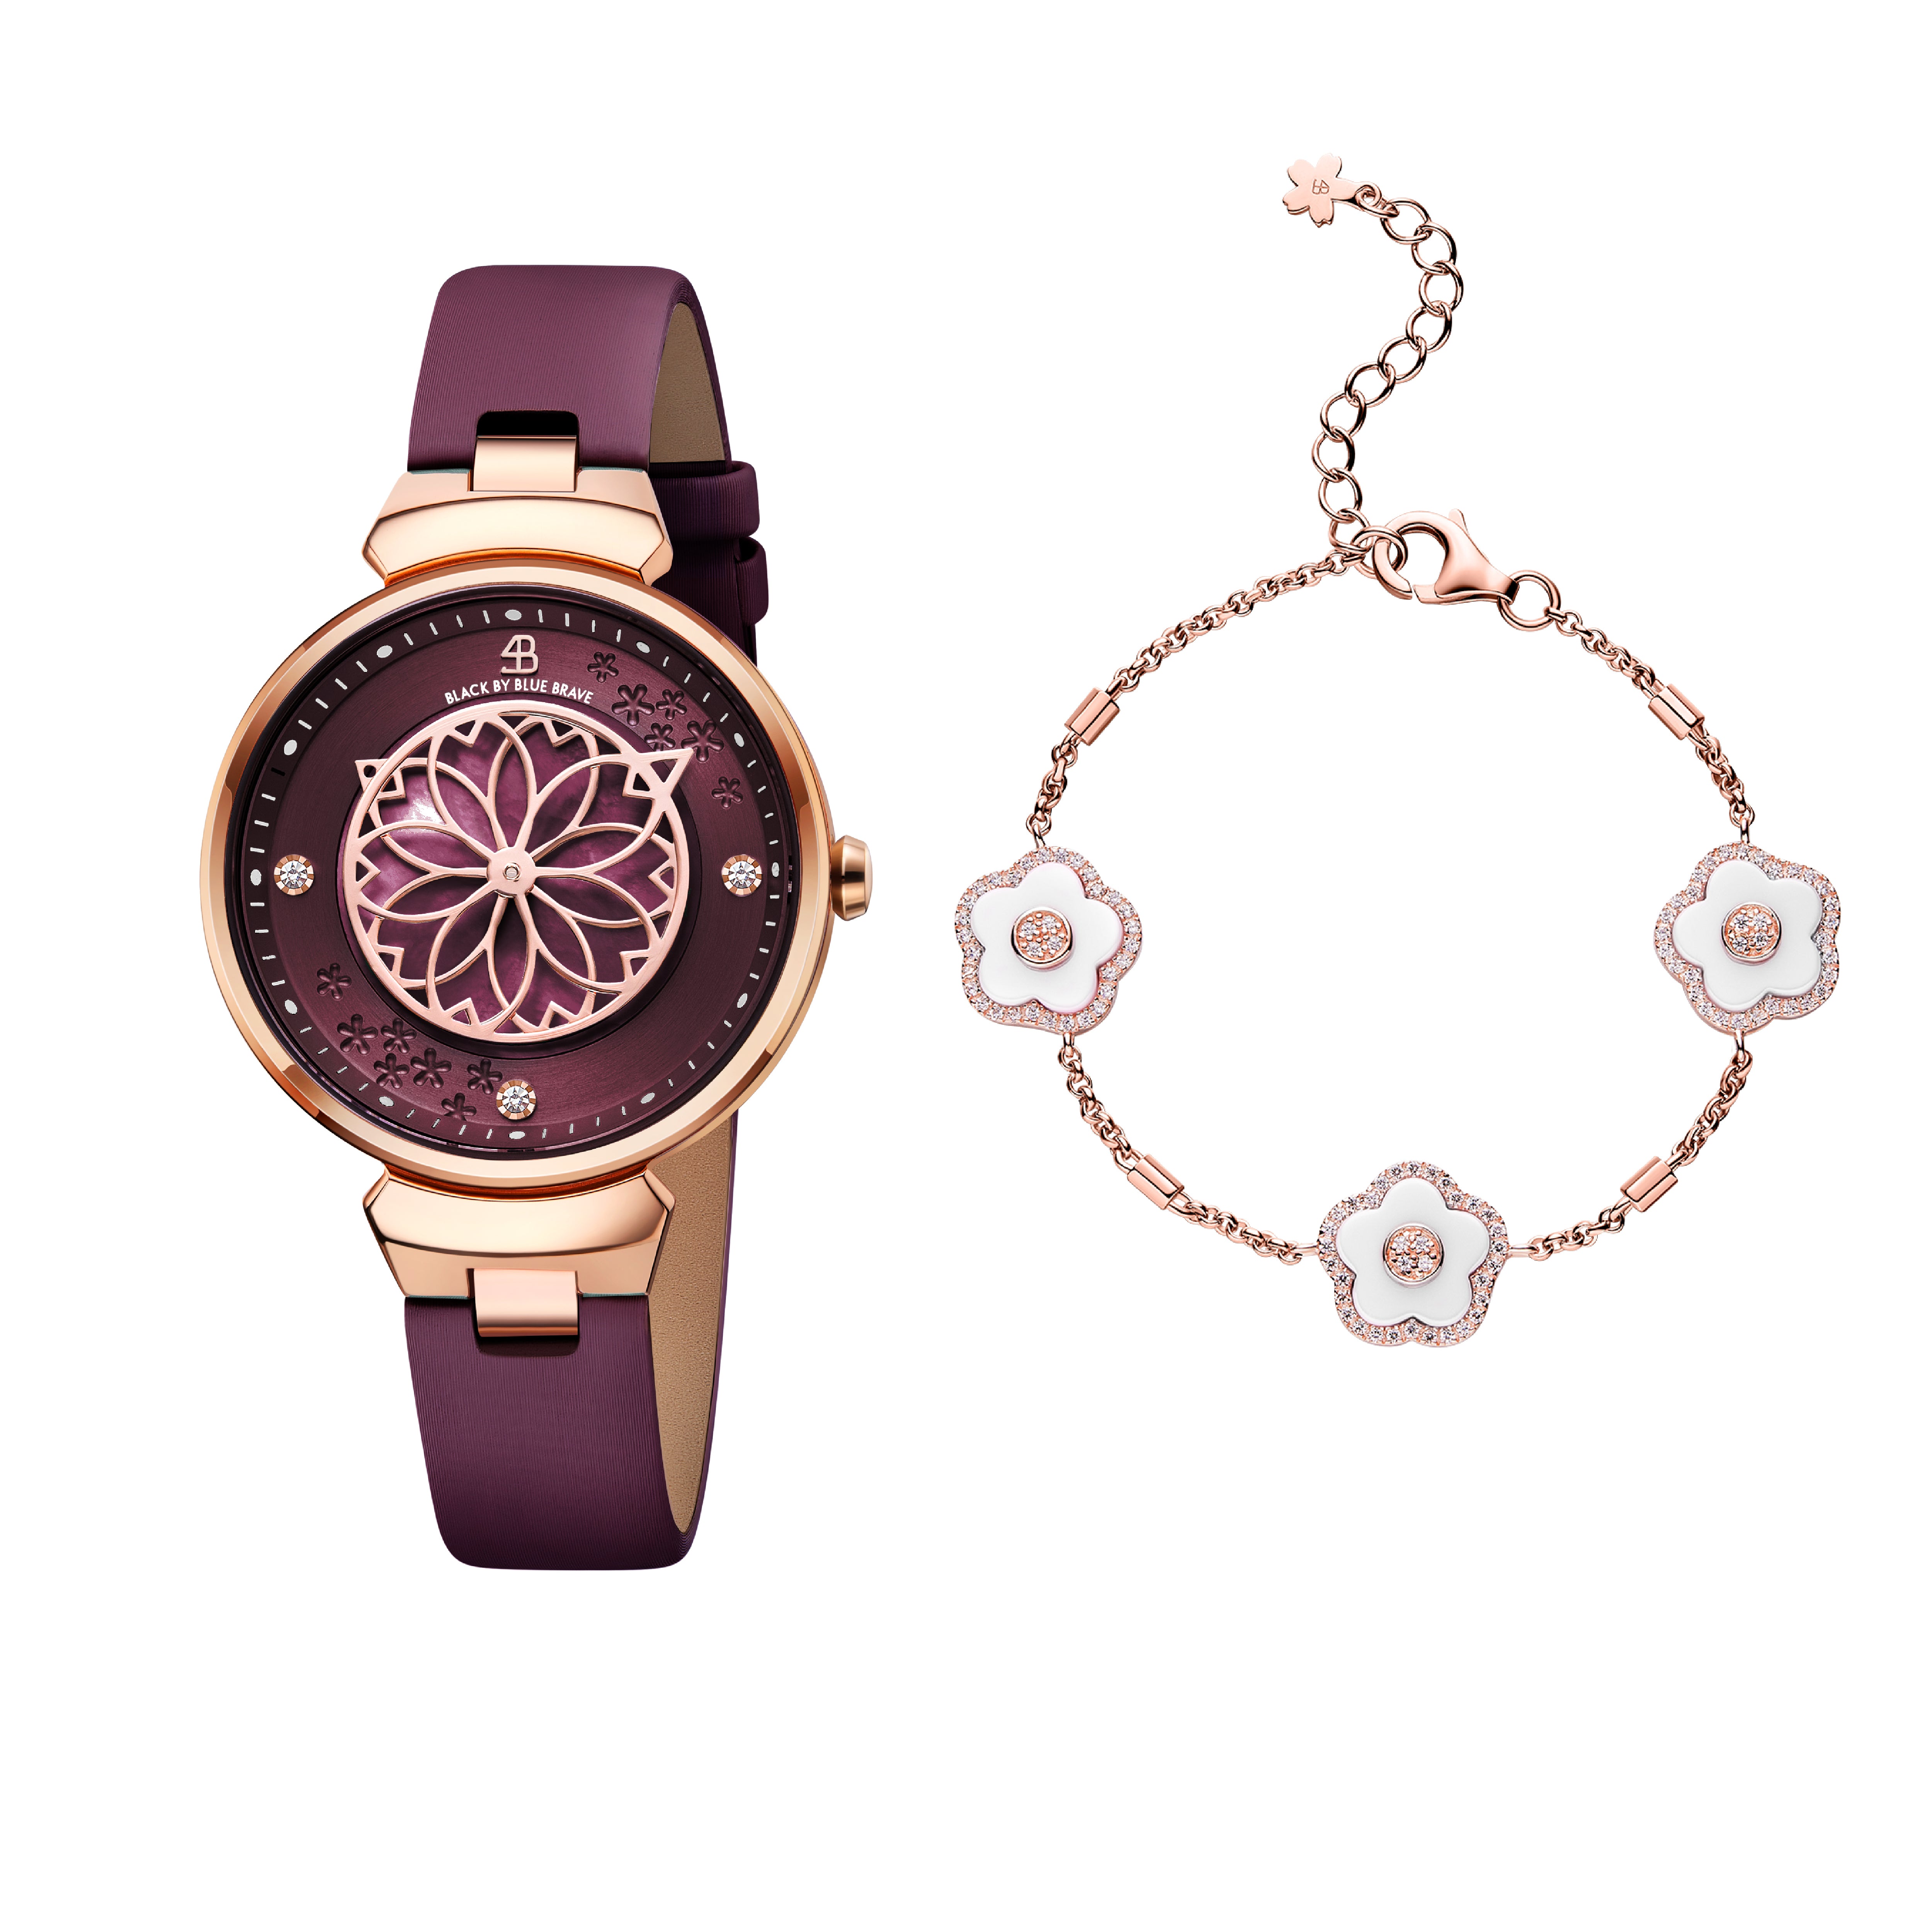 Ruby Red Cherry Blossom Watch With Rosegold Bracelet & White Ceramic